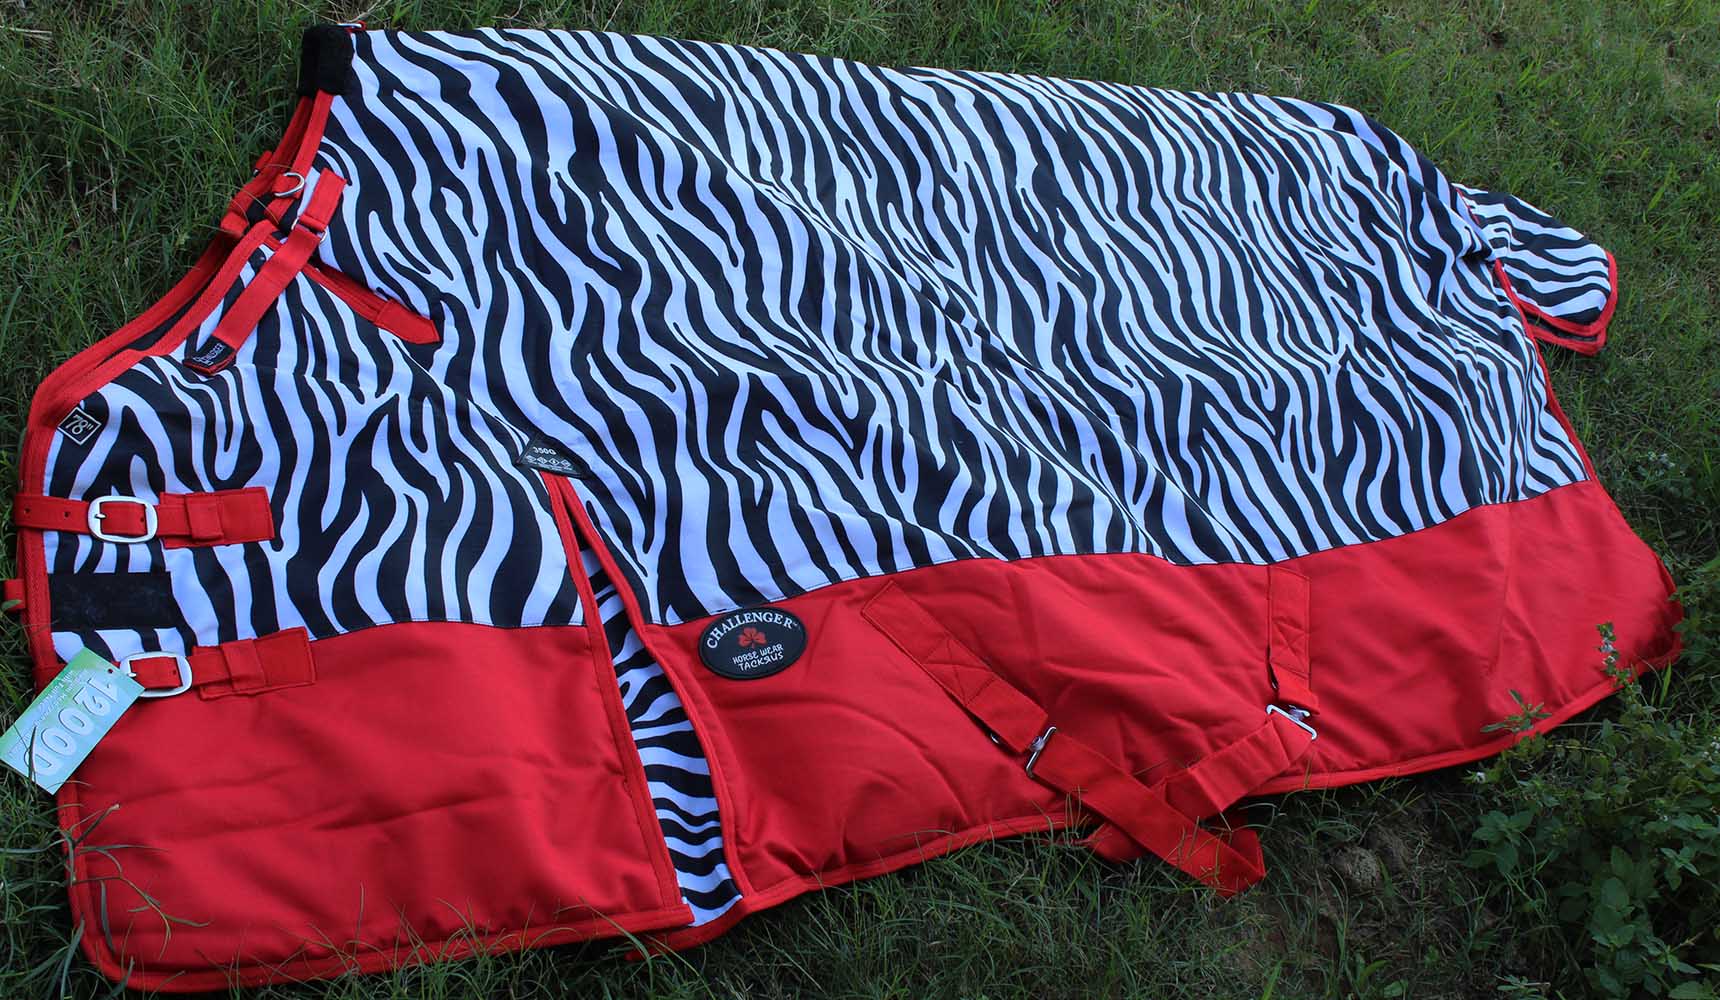 The 10 Best Warm Blankets for Winter. eBay. Views 4 Likes Comments Comment TheseThe 10 Best Warm Blankets for Winter. eBay. Views 4 Likes Comments Comment Theseblanketsare known for being very warm,The 10 Best Warm Blankets for Winter. eBay. Views 4 Likes Comments Comment TheseThe 10 Best Warm Blankets for Winter. eBay. Views 4 Likes Comments Comment Theseblanketsare known for being very warm,heavy, long-lasting, and affordable.